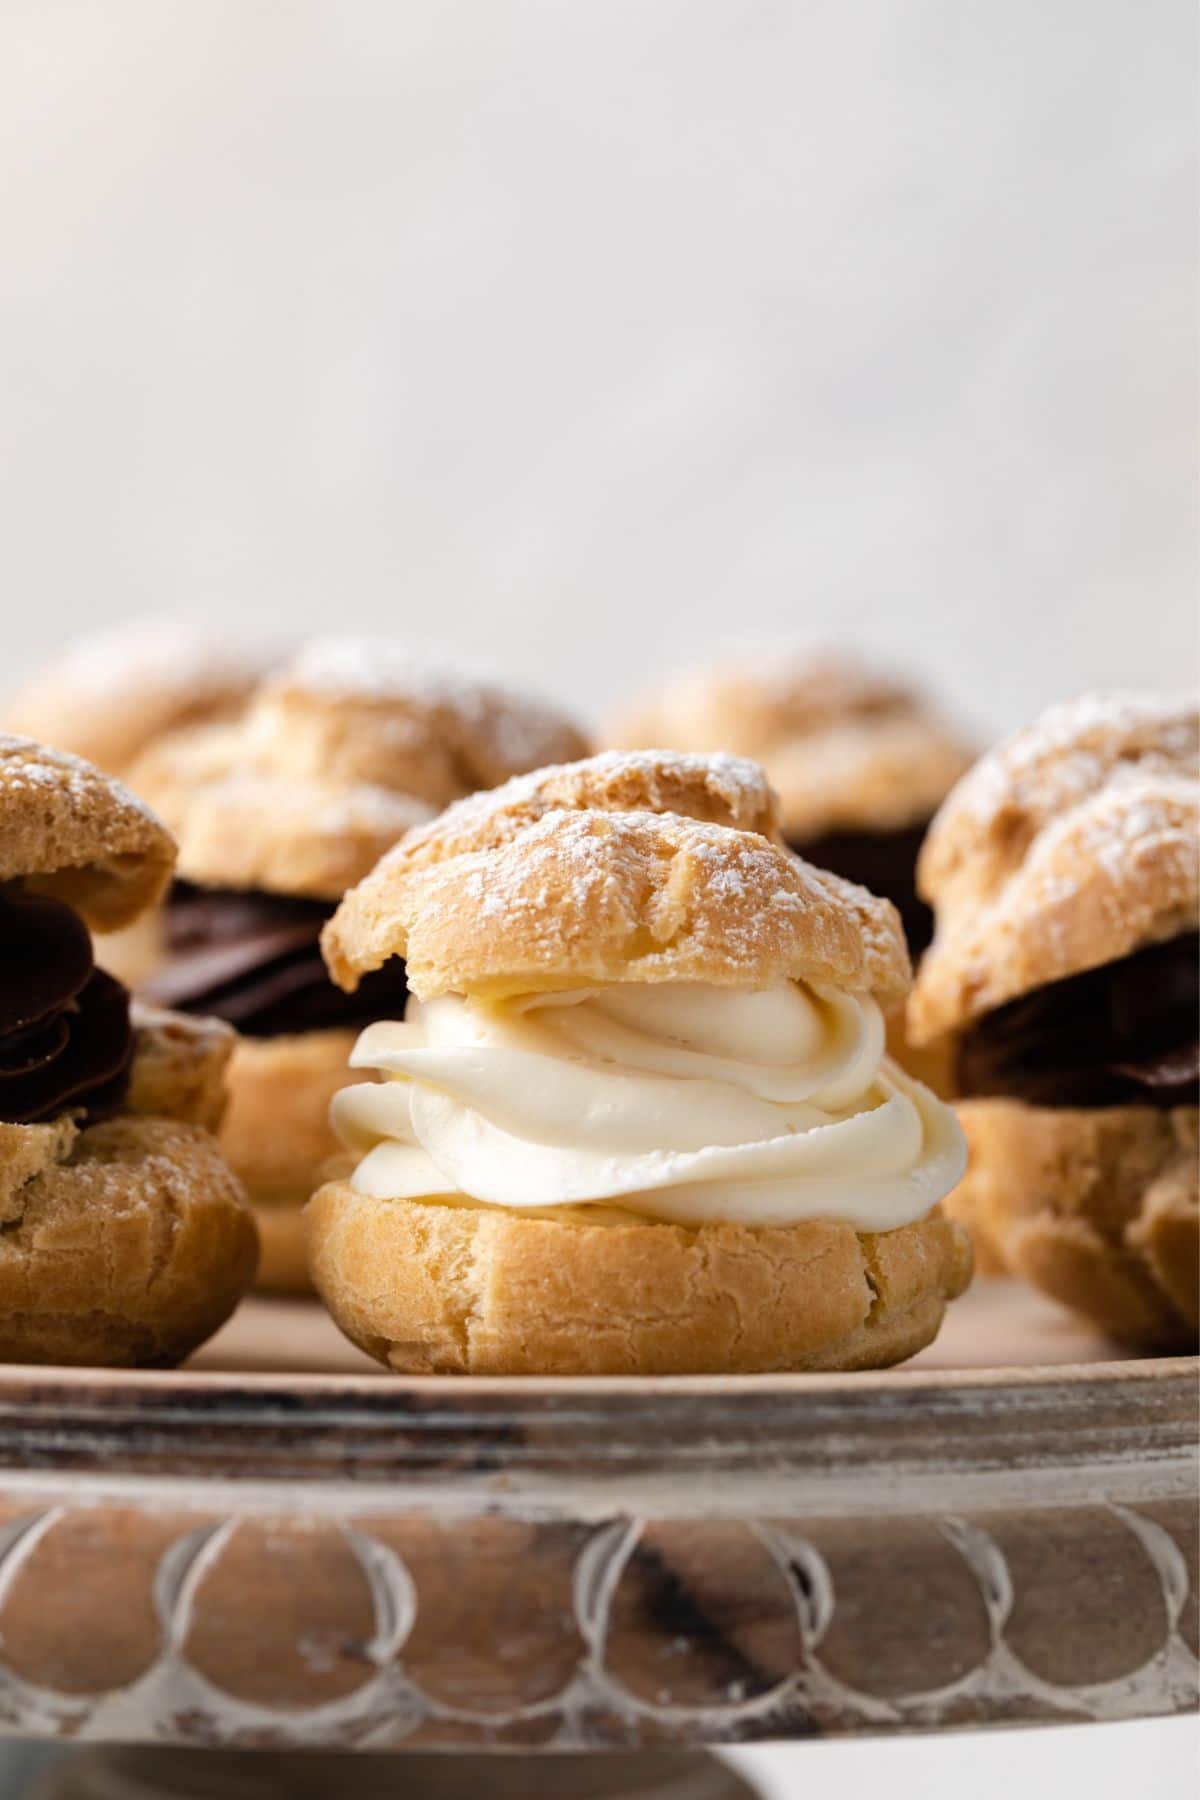 Side view of cream puffs filled with whipped cream and dusted with powdered sugar.